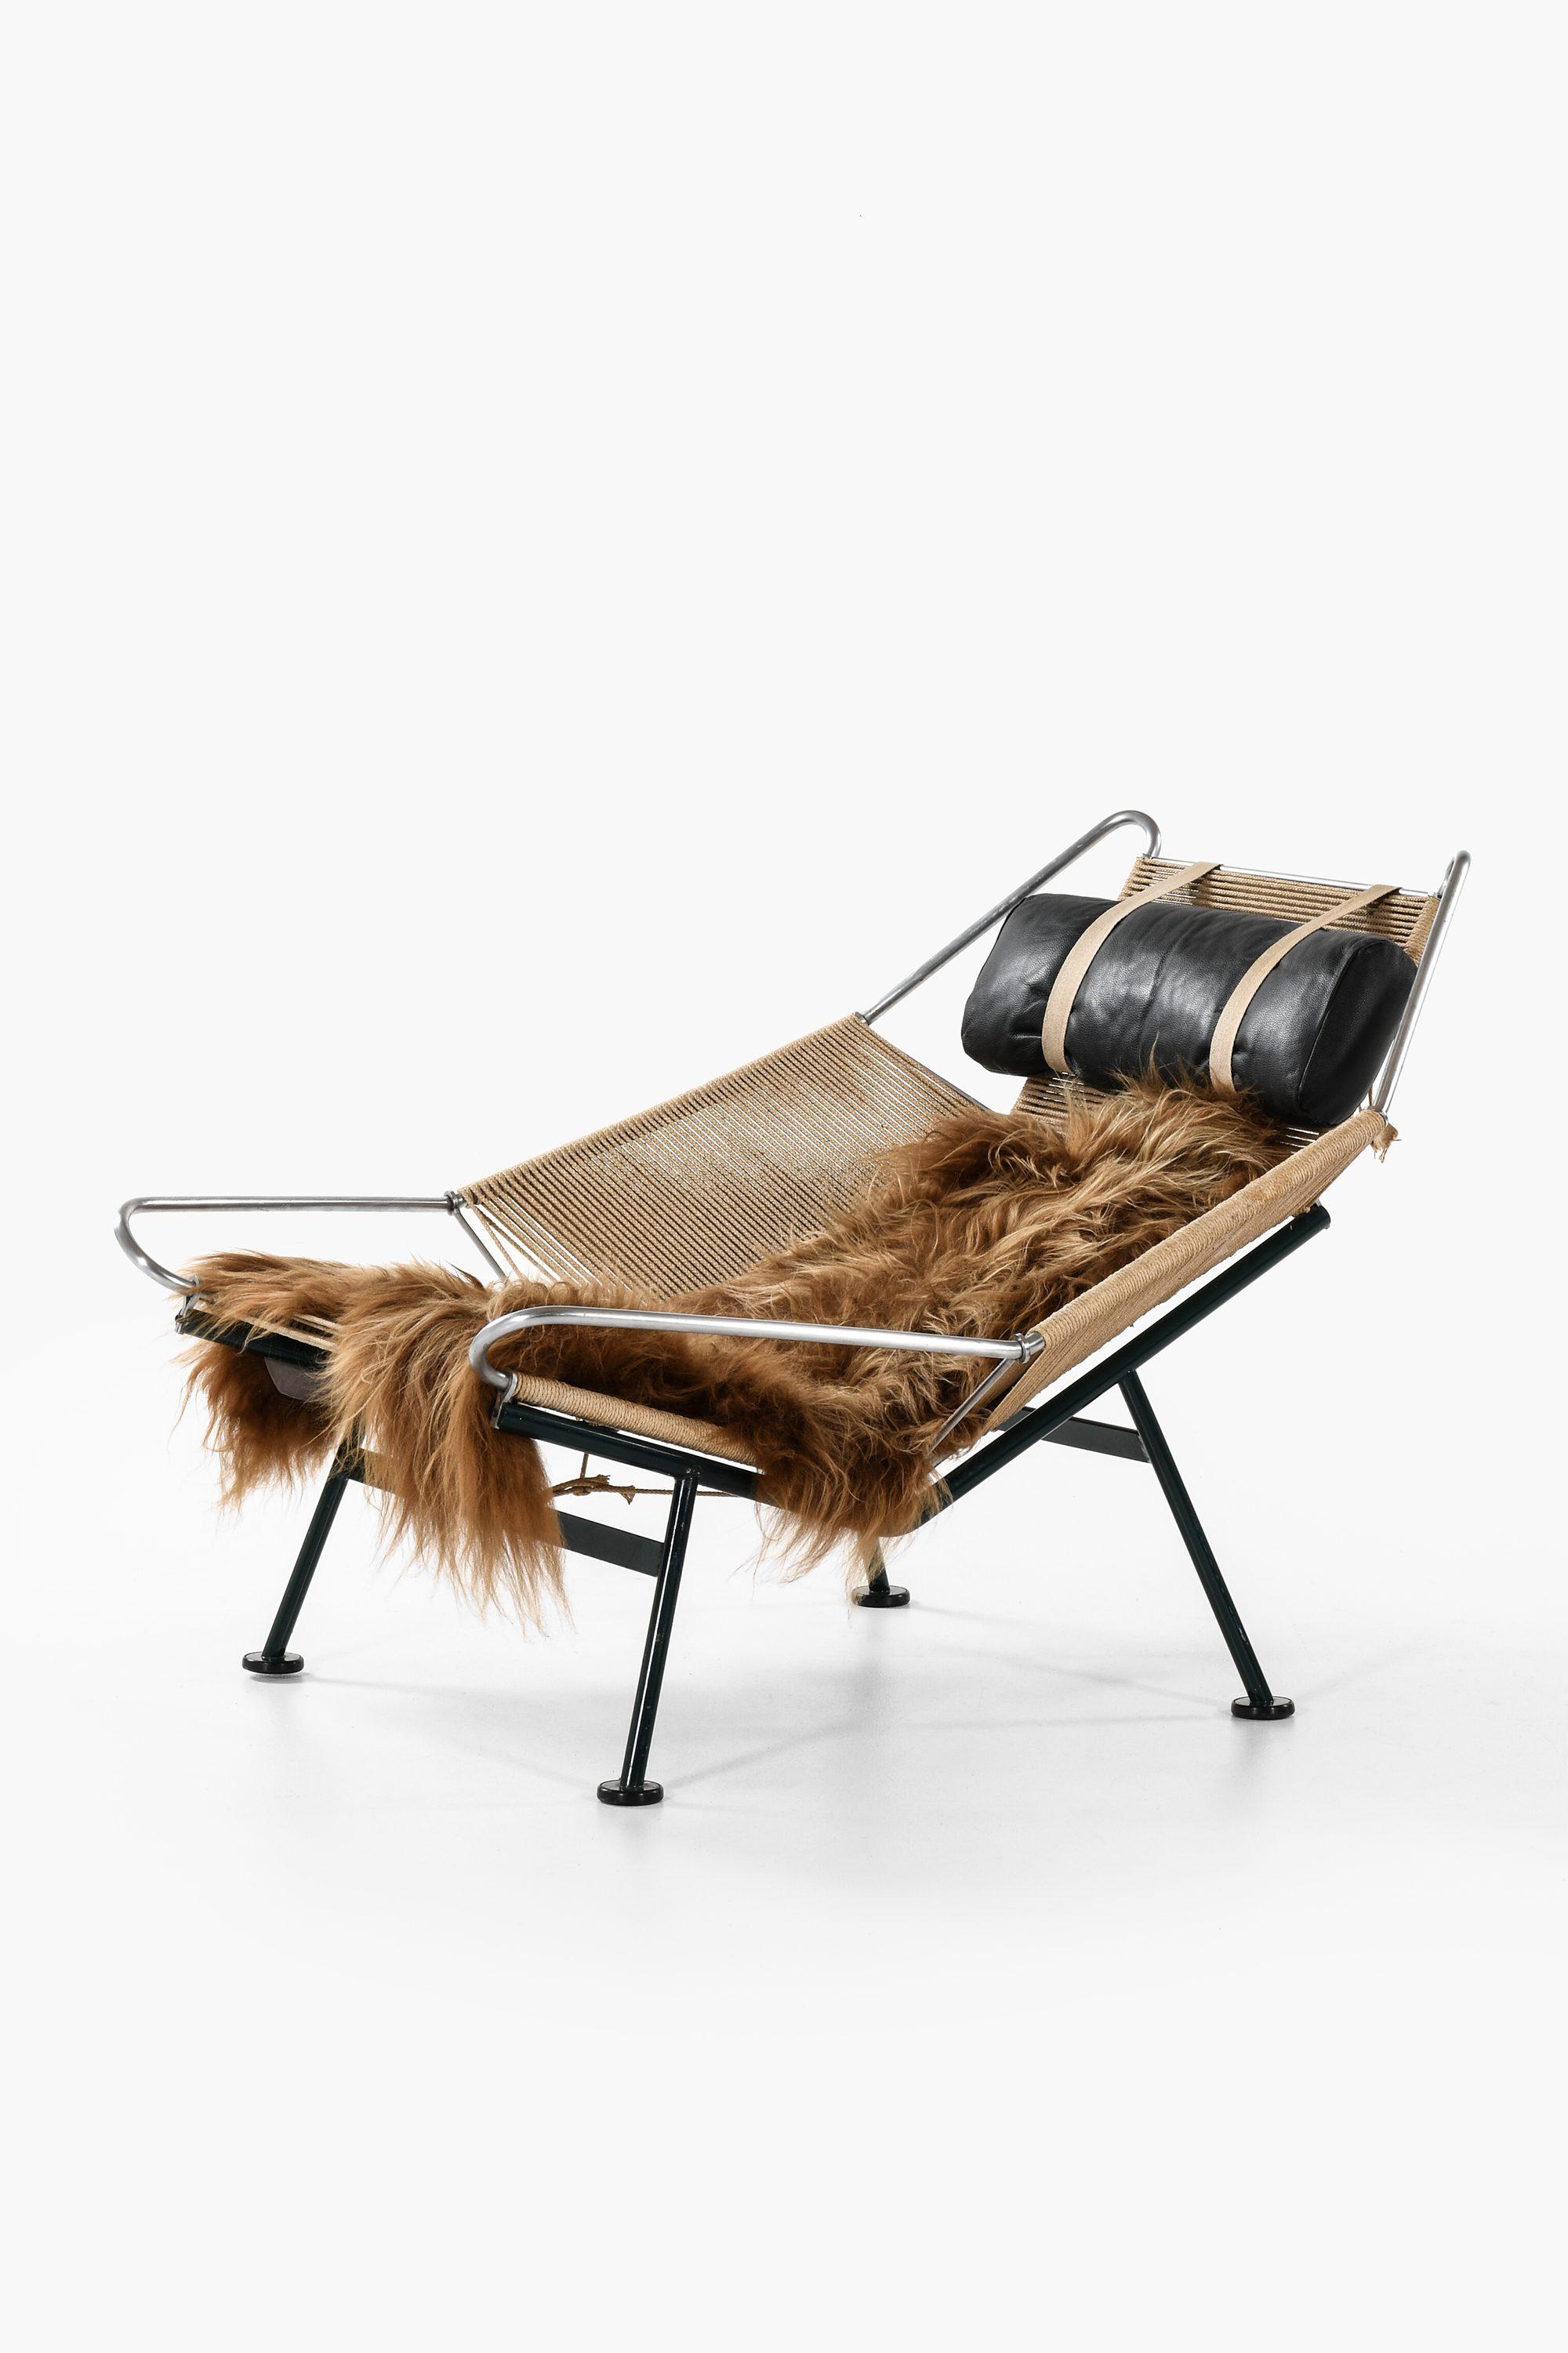 Rare lounge chair / flag halyard chair designed by Hans Wegner
Produced by GETAMA in Denmark
Metal, flagline, sheepskin, cushion
1960s
Good vintage condition, with signs of usage
midcentury, Scandinavia
Dimensions (W x D x H): 105 x 120 x 79